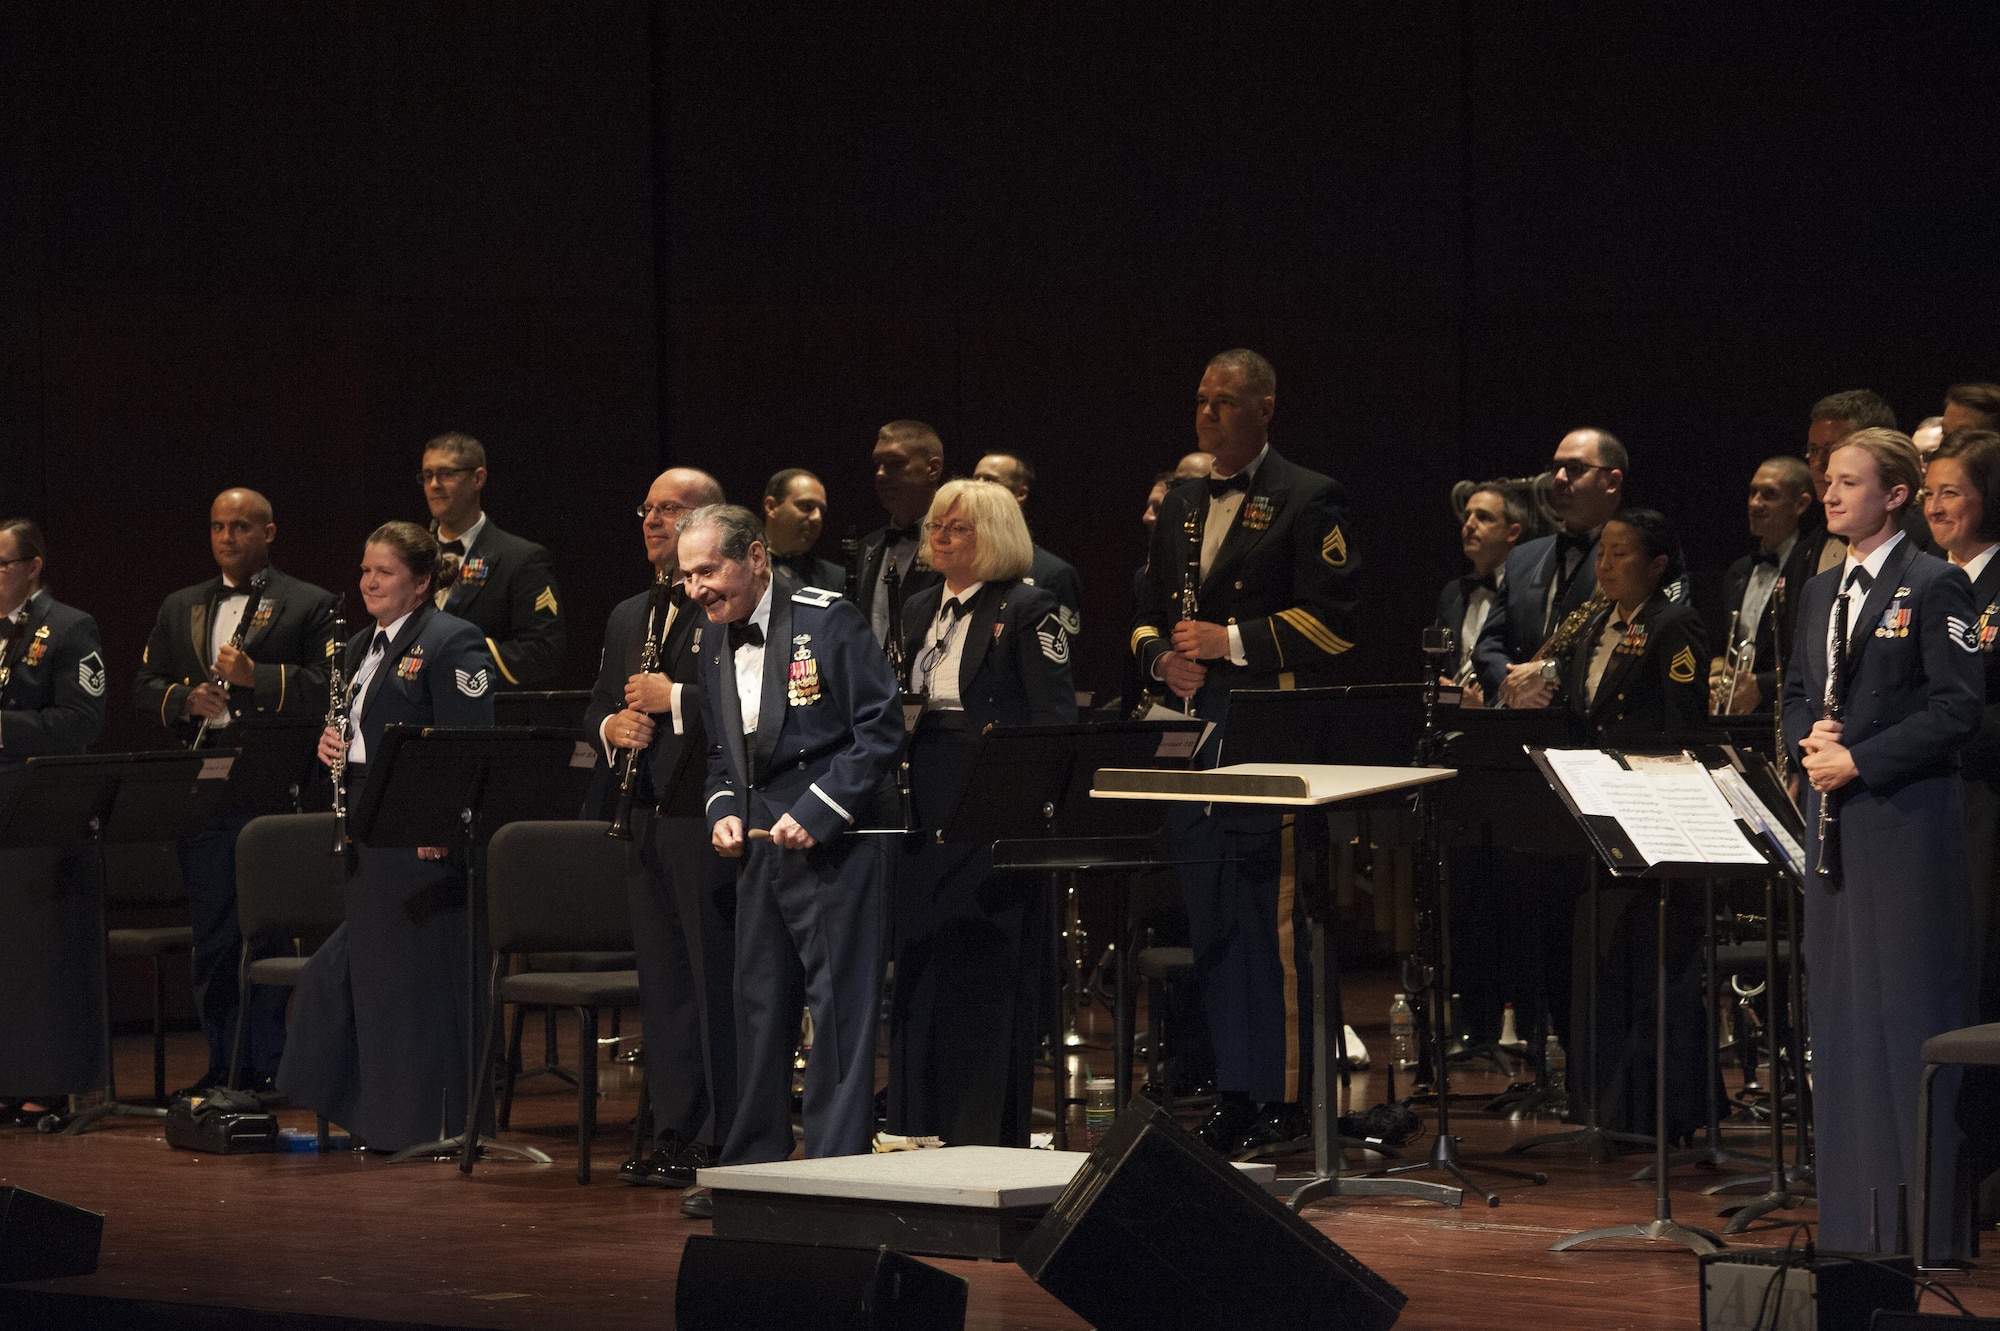 Col. (Ret.) Arnald Gabriel, former 564th Tactical Air Command Band director, bows to the audience after leads the U.S. Air Force Heritage of America Band to play “Stars and Stripes Forever” during a USAF HOAB 75th Anniversary Band Concert at the Ferguson Center for the Arts in Newport News, Va., Oct. 1, 2016. Gabriel was also a World War II veteran, who landed on the coastlines of Normandy, France, alongside more than 160,000 Allied troops during “D-day” on June 6, 1944. D-day was the largest amphibious attack in U.S. history. (U.S. Air Force photo by Staff Sgt. Nick Wilson)